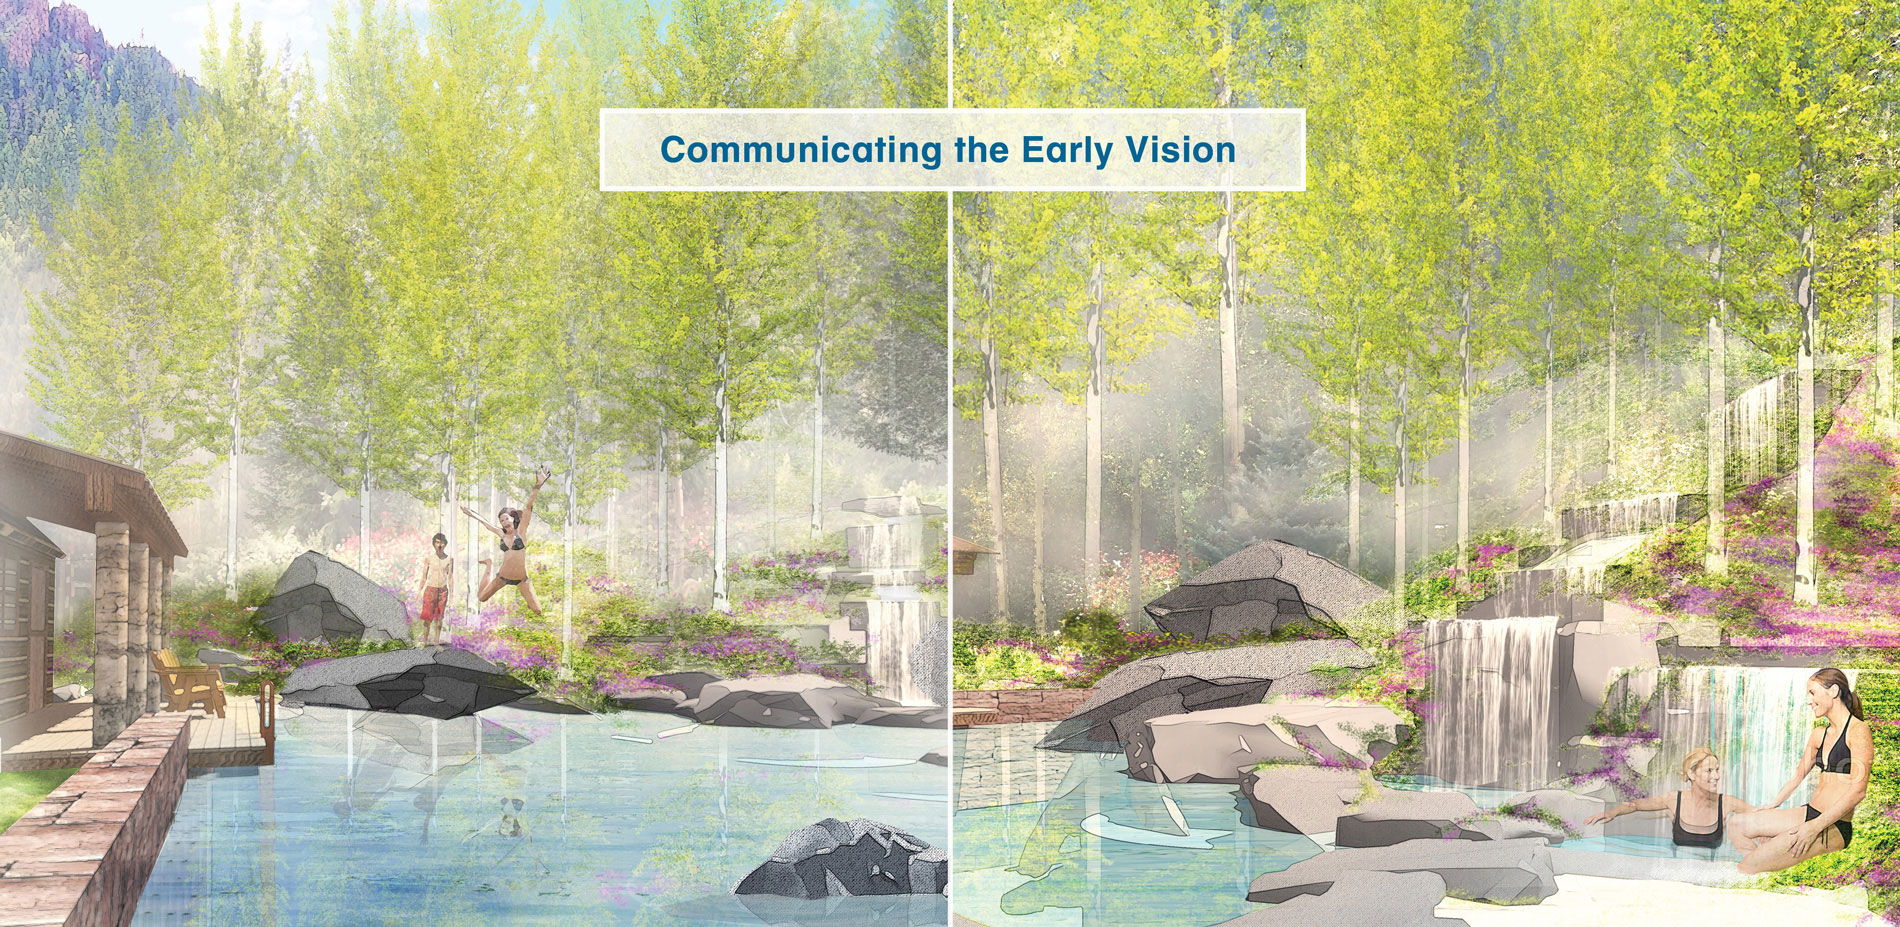 COMMUNICATING THE EARLY VISION